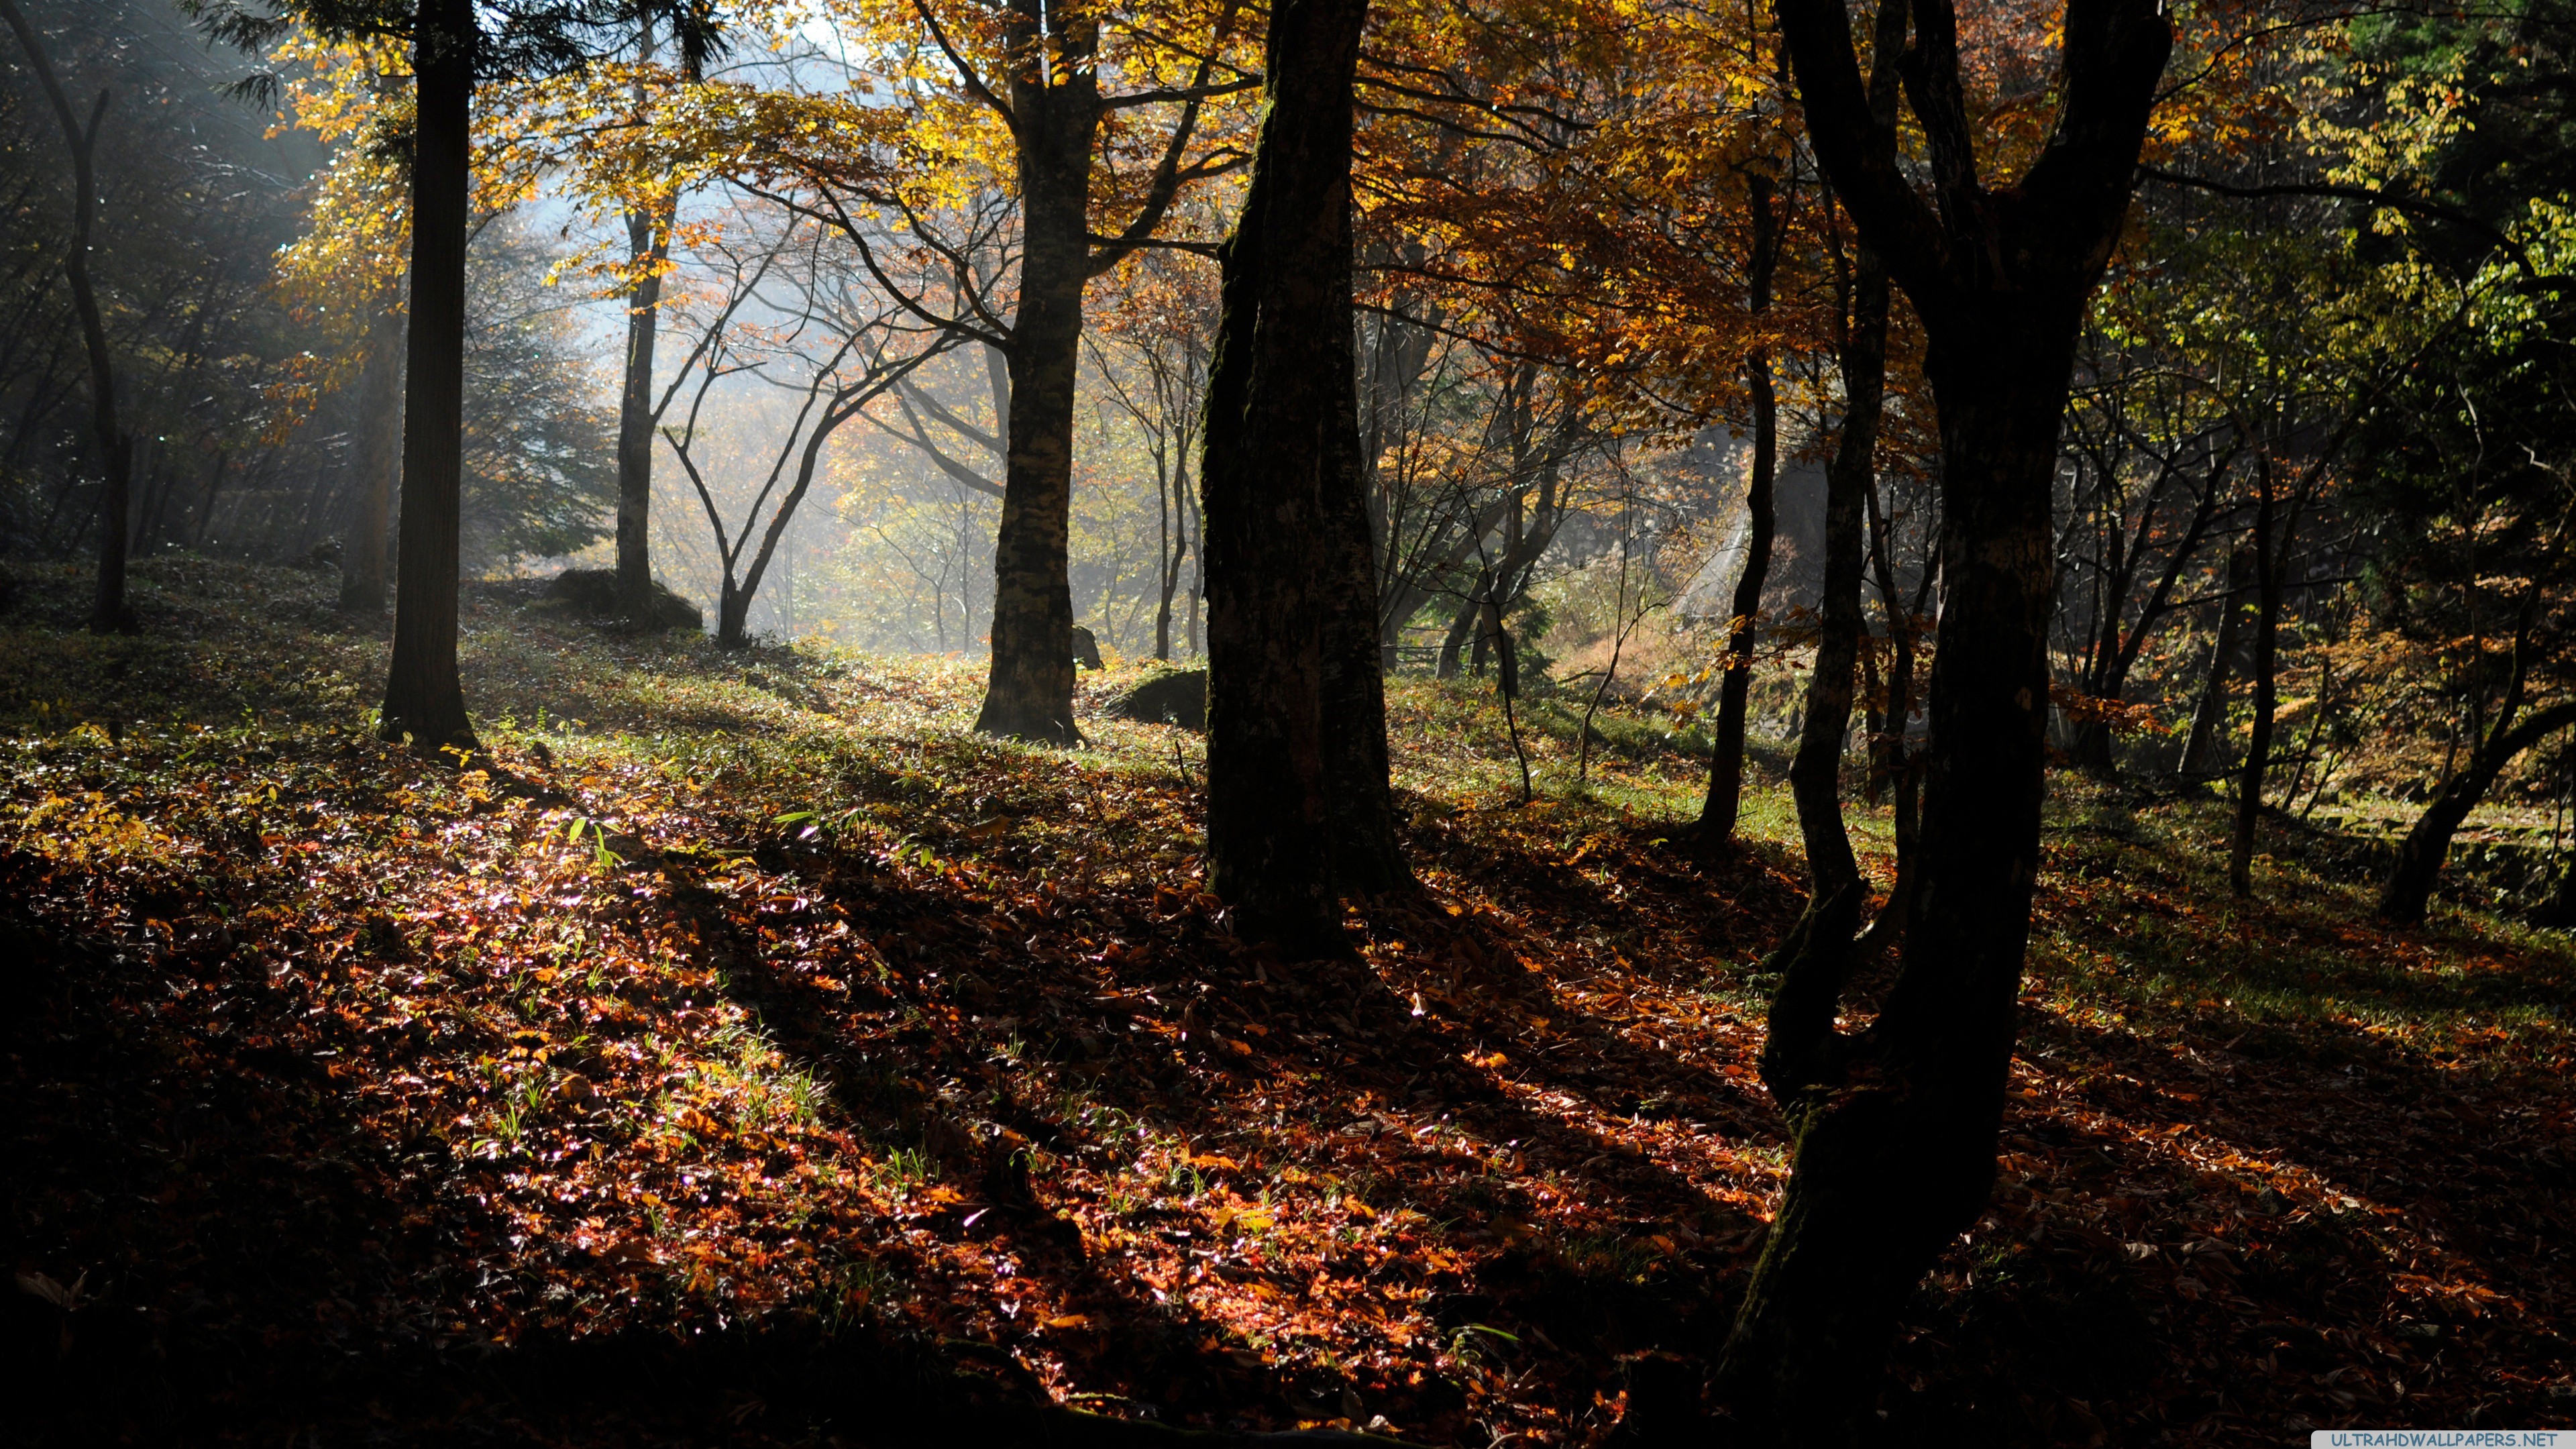 General 3840x2160 fall forest nature outdoors